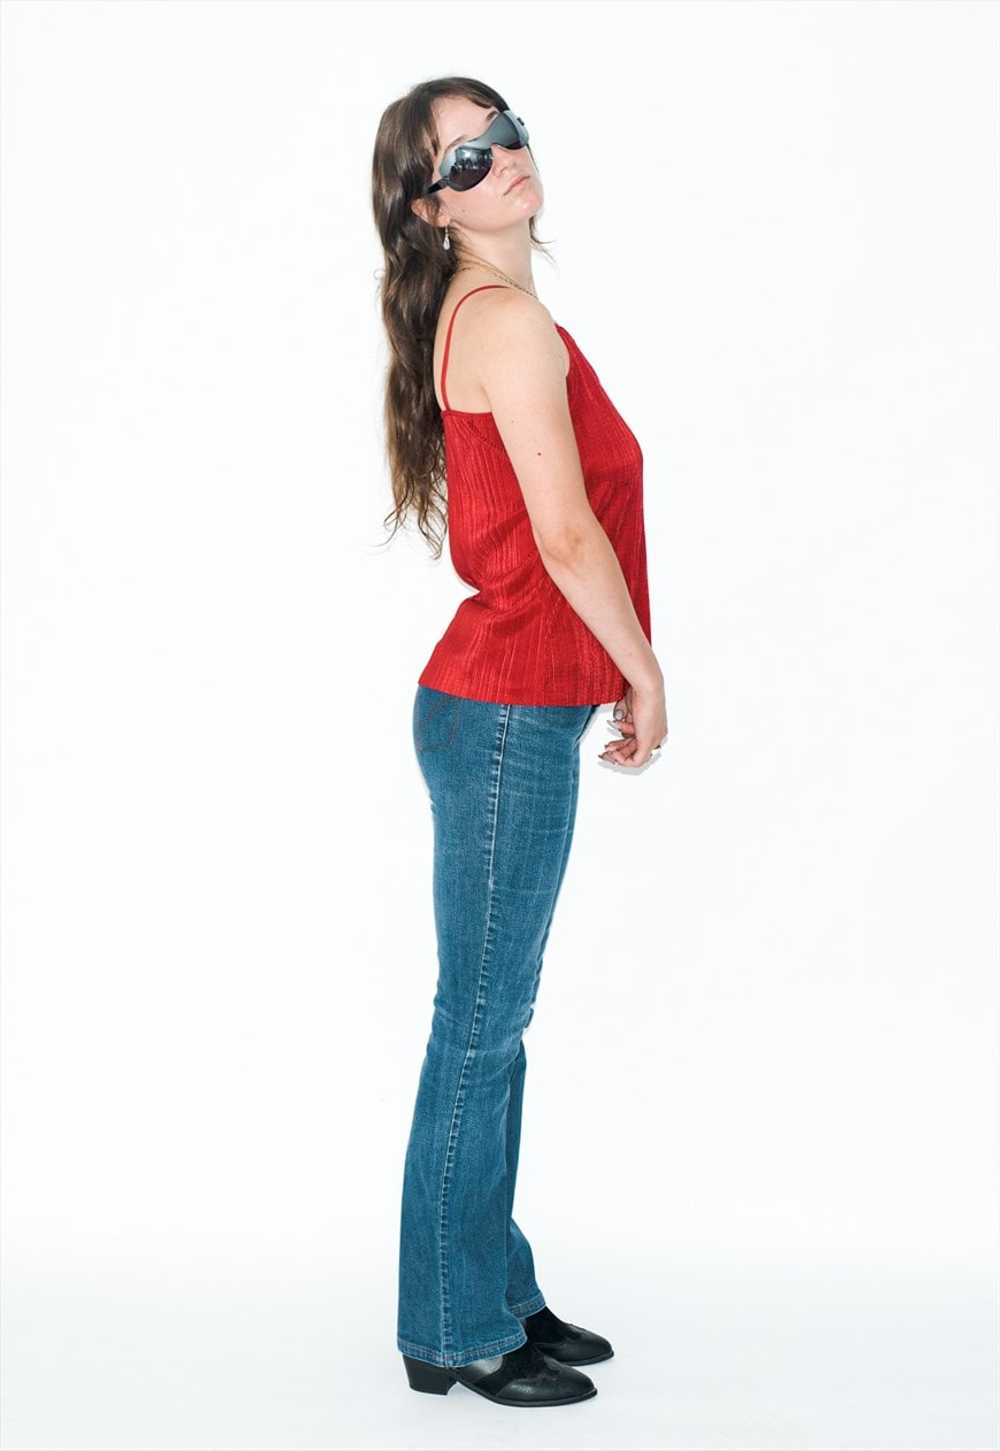 Vintage 90s stretchy cute sleeve-less top in red - image 4